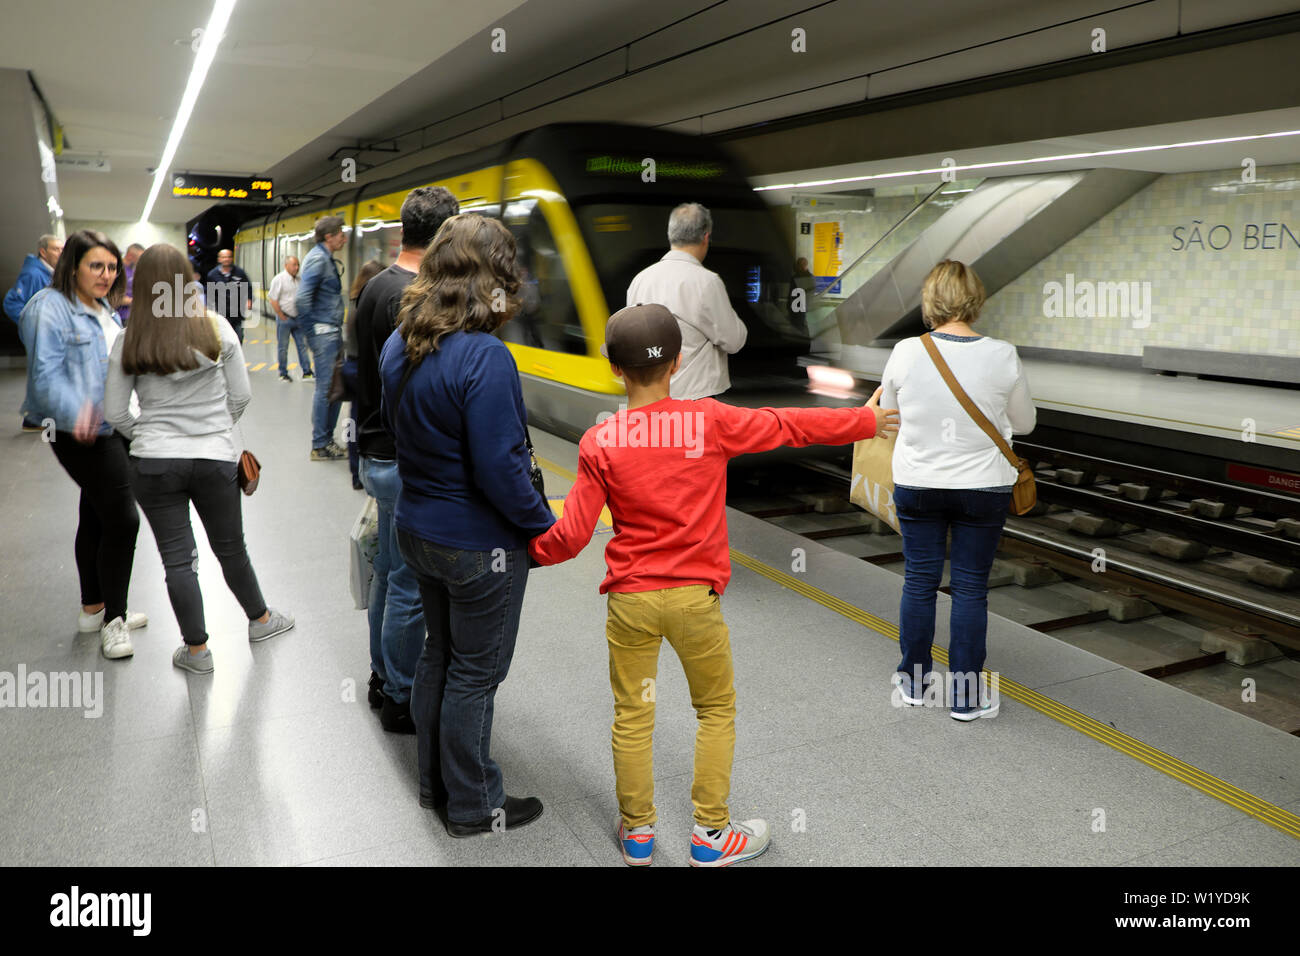 Mother holding boy's child's hand on platform waiting with passengers as underground train approaches in Porto Oporto Portugal Europe  KATHY DEWITT Stock Photo